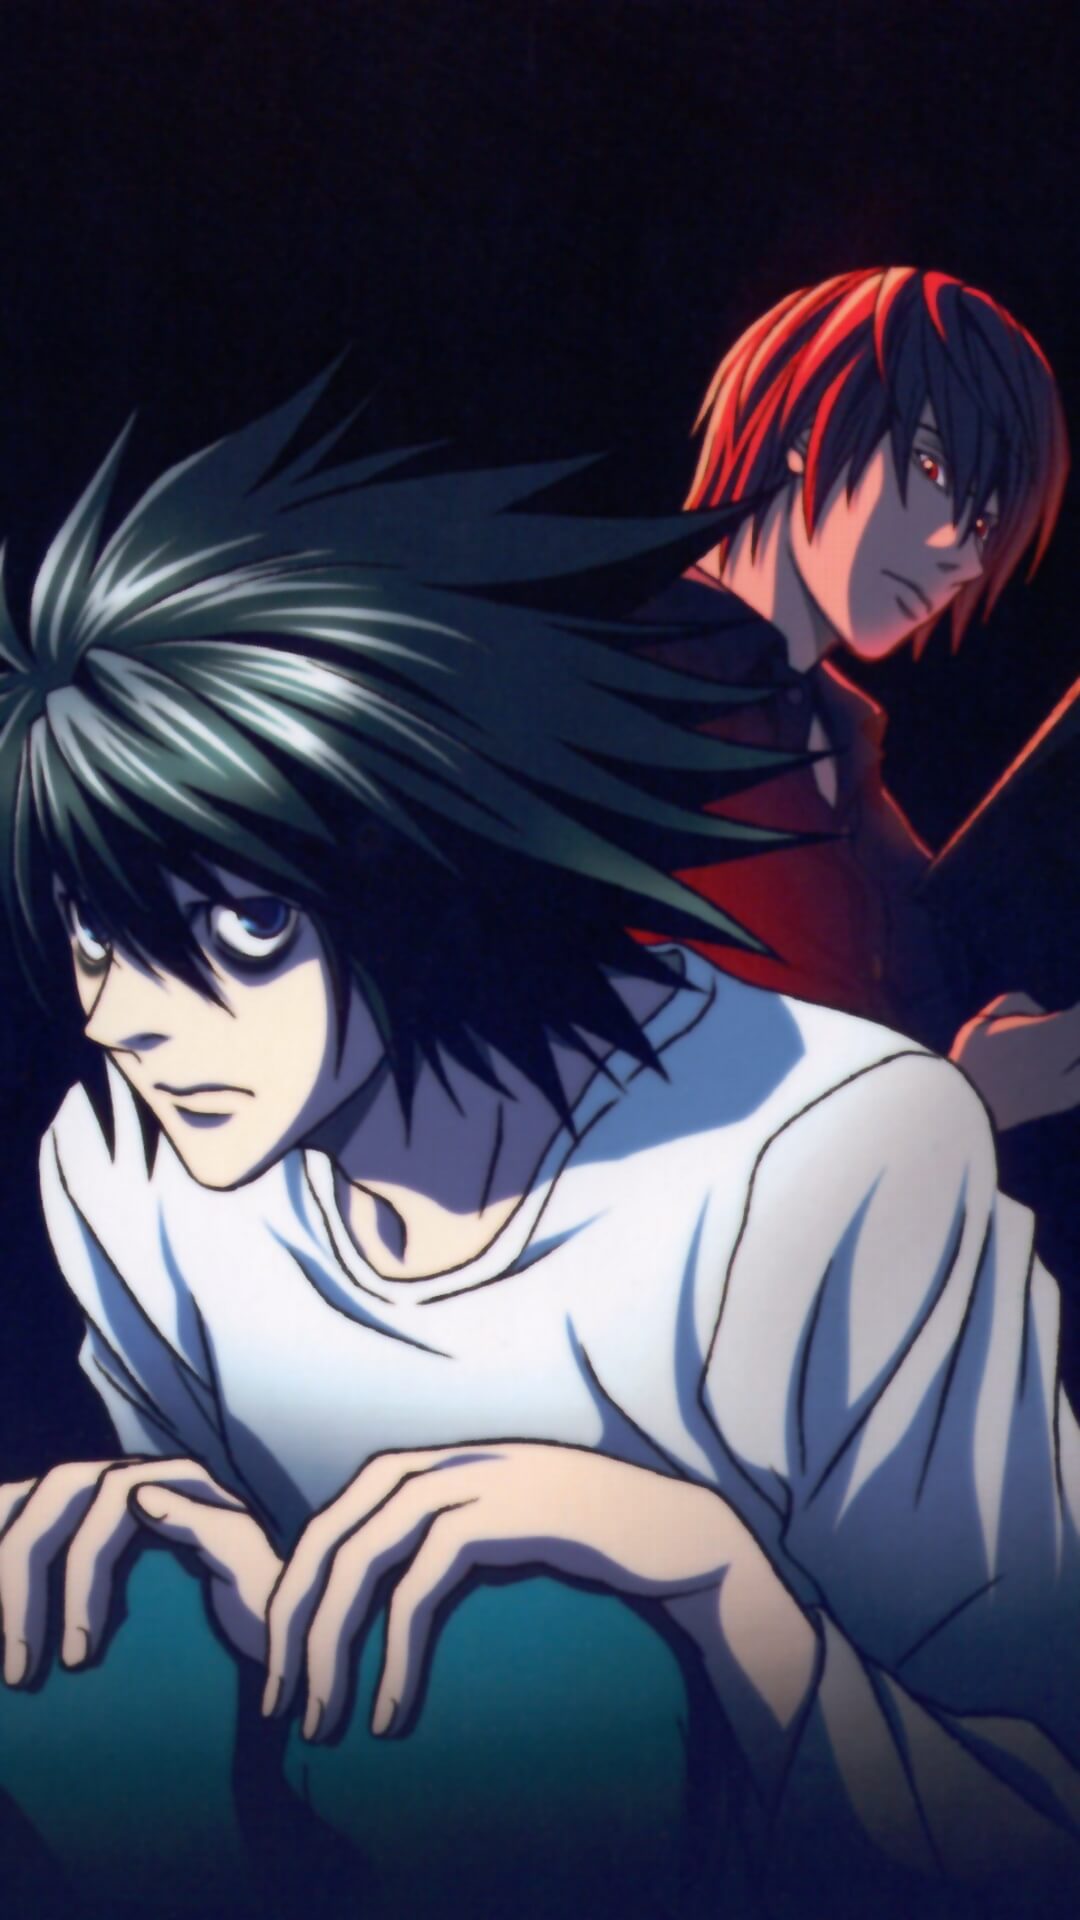 L Death Note SBE iPhone Wallpaper by xTrayzer